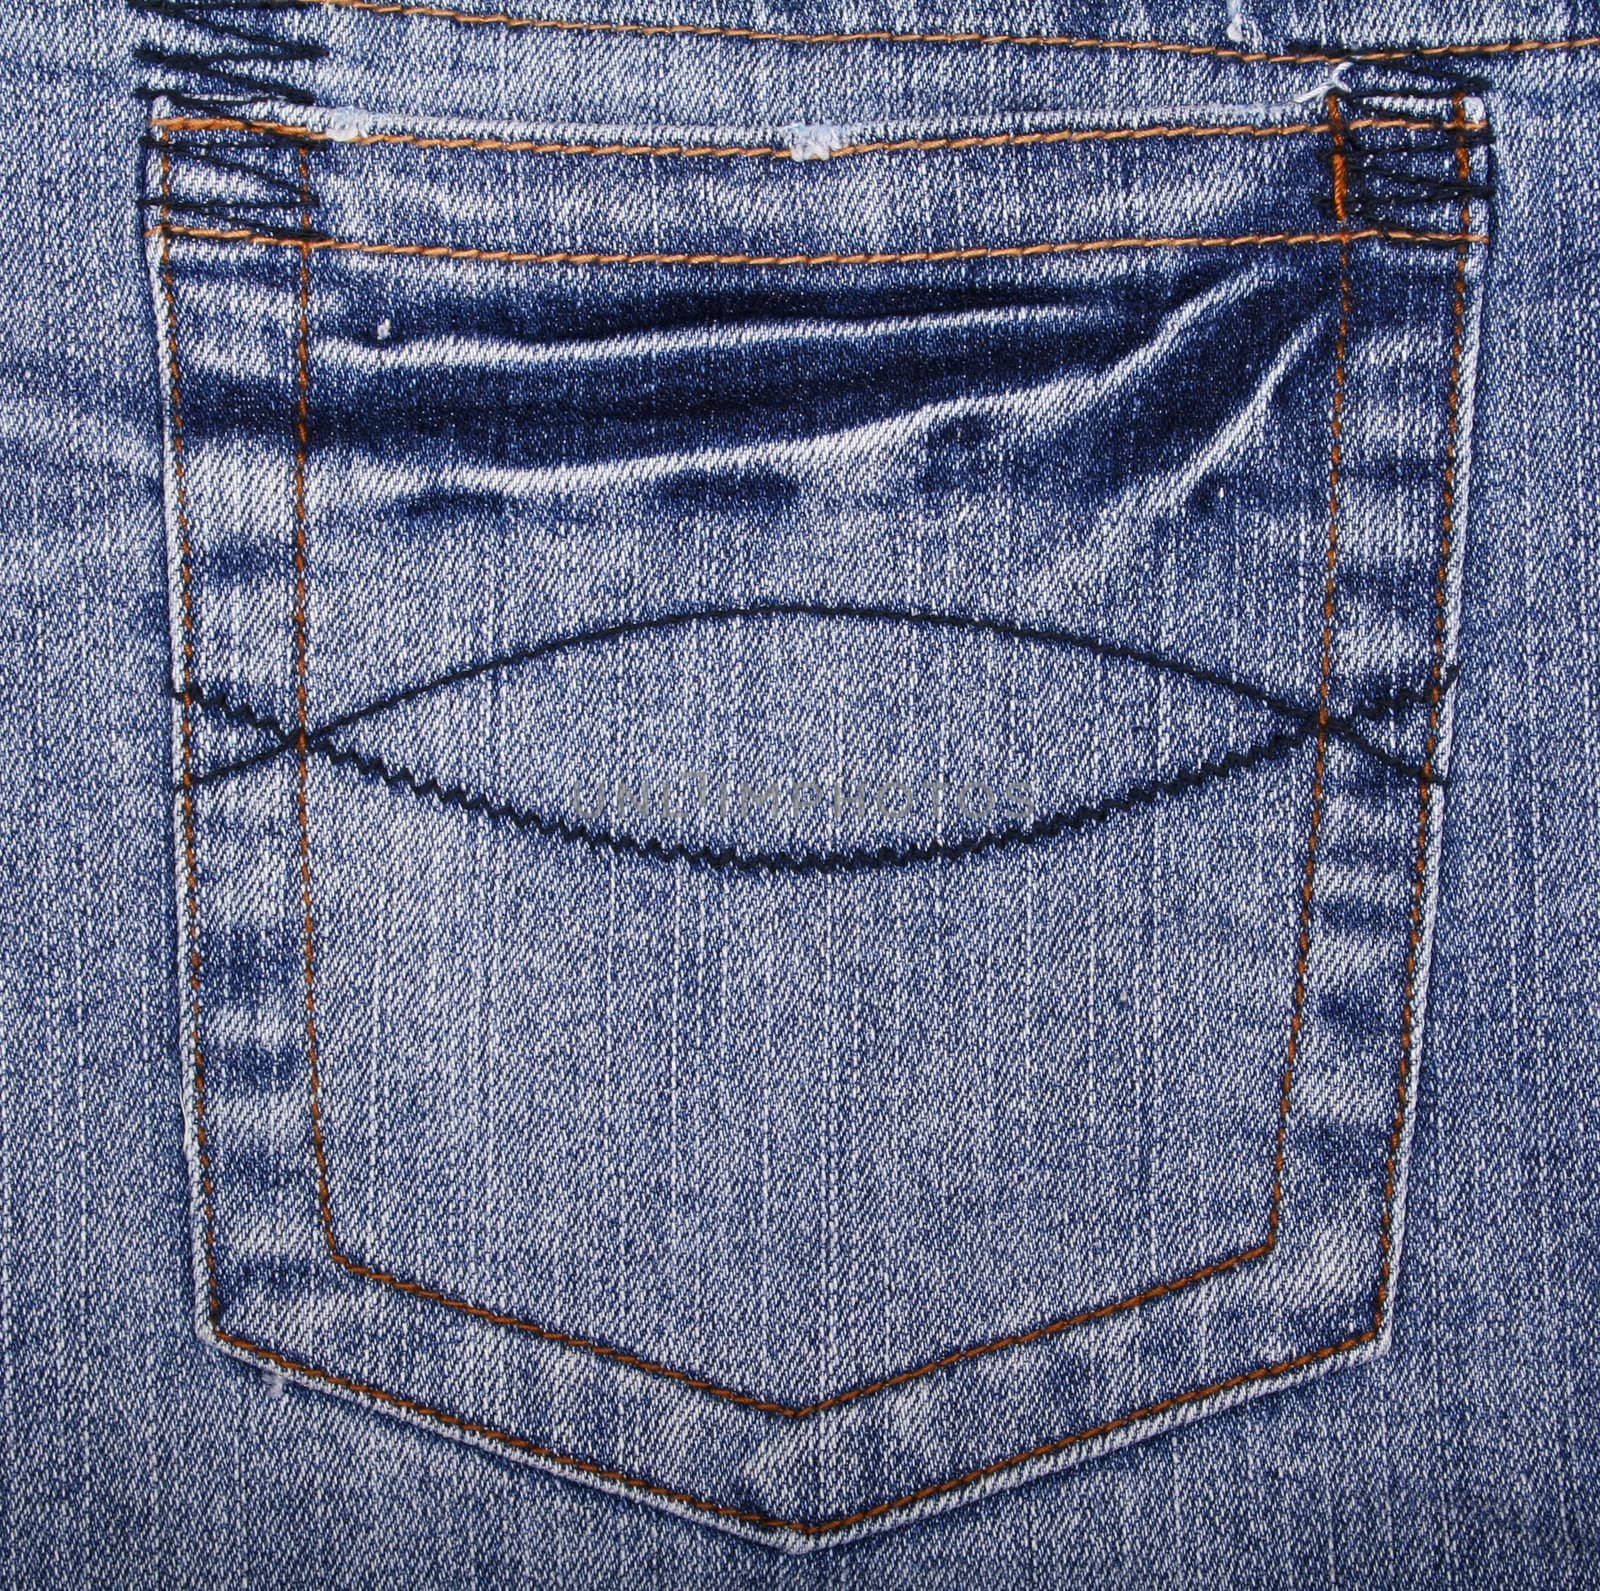 Blue jeans fabric with pocket  by oxanatravel